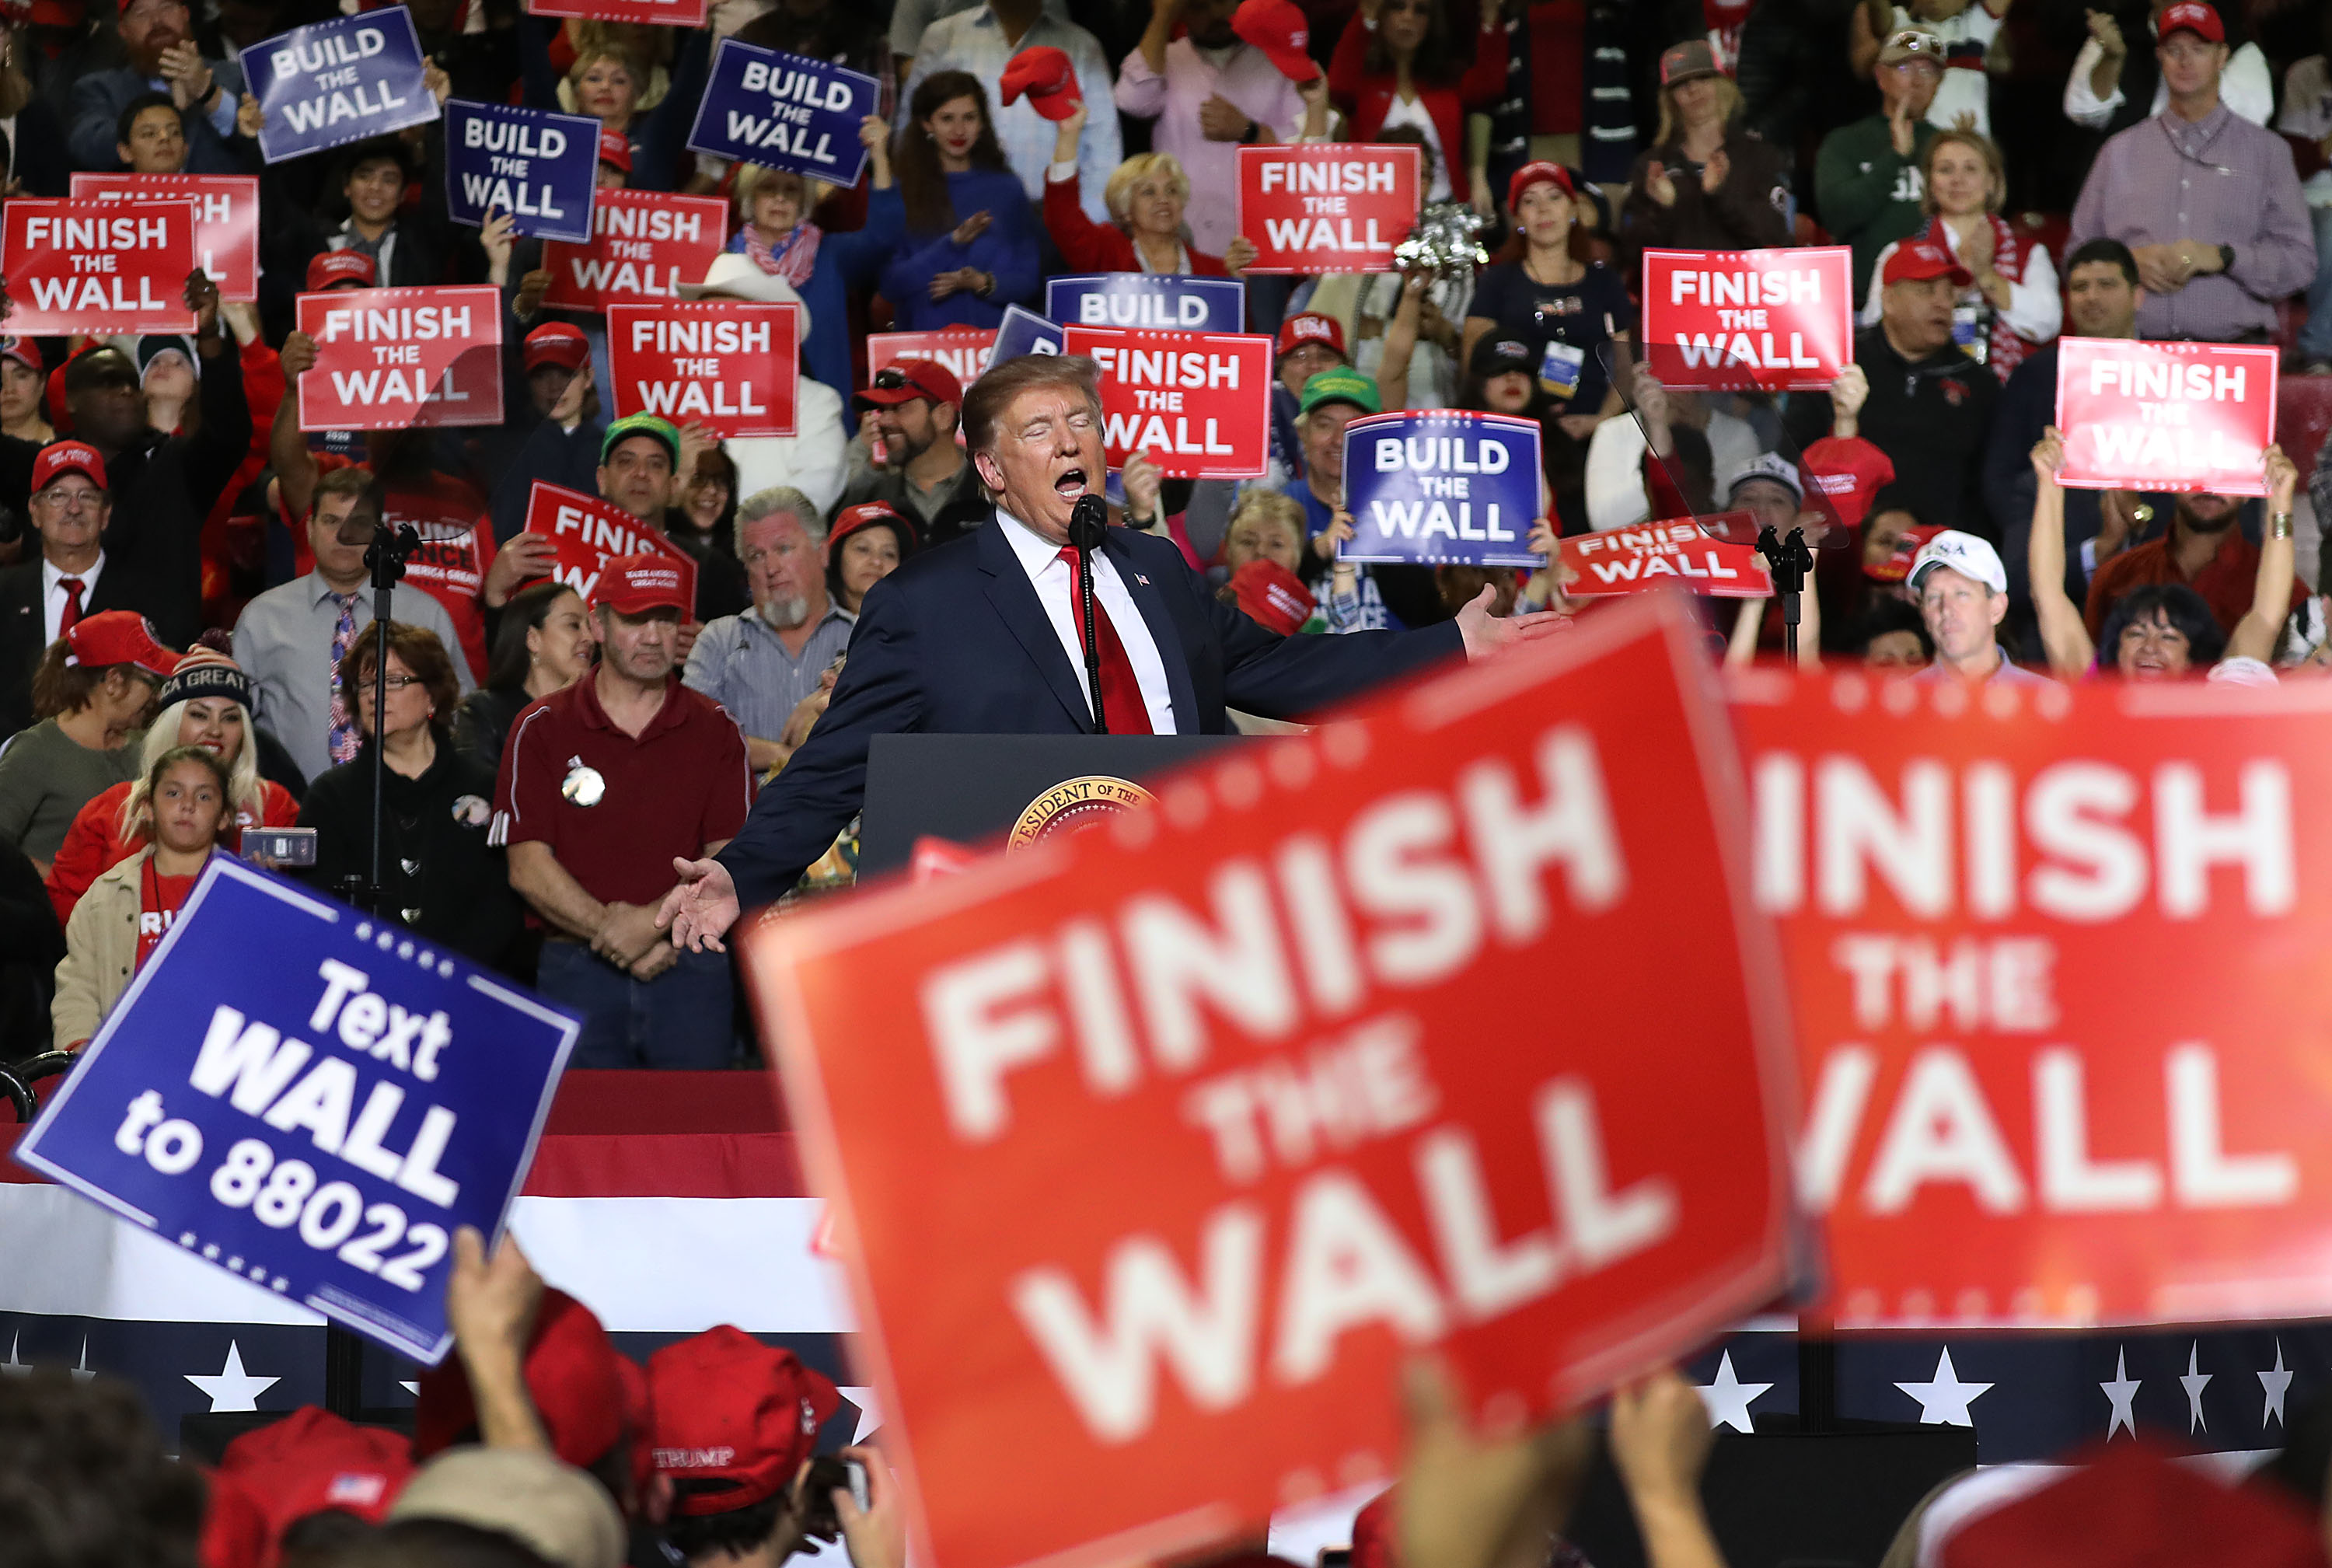 EL PASO, TEXAS - FEBRUARY 11: U.S. President Donald Trump speaks during a rally at the El Paso County Coliseum on February 11, 2019 in El Paso, Texas. Trump continues his campaign for a wall to be built along the border as the Democrats in Congress are asking for other border security measures. (Photo by Joe Raedle/Getty Images)